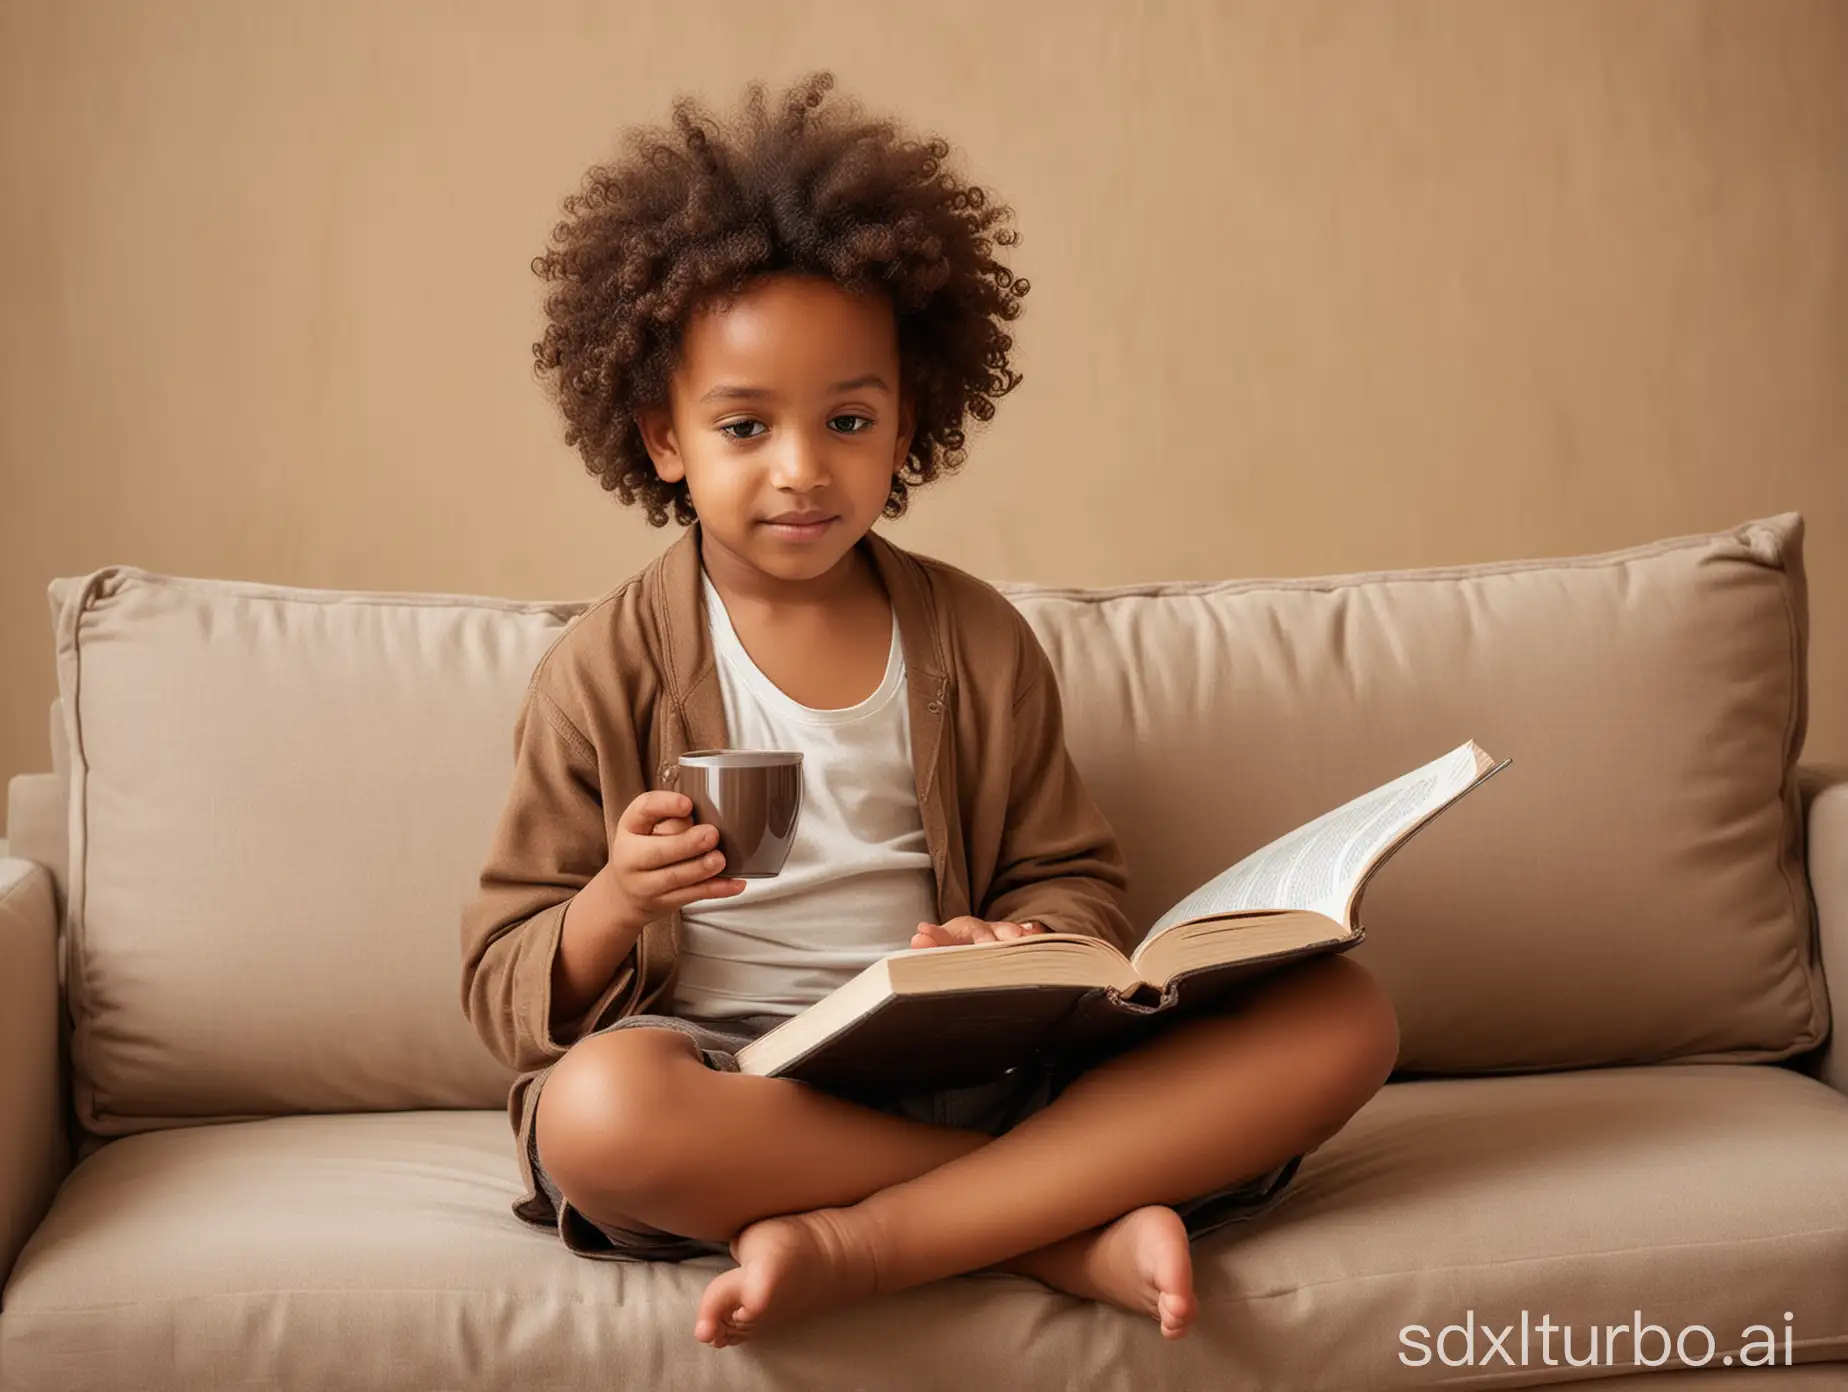 Little Ethiopian babay woth beautiful curly hair sitting on small sofa wearing reading glass holding opened book on his right hand and holding coffee cup on his left hand in a very calm and coffee color touch room.